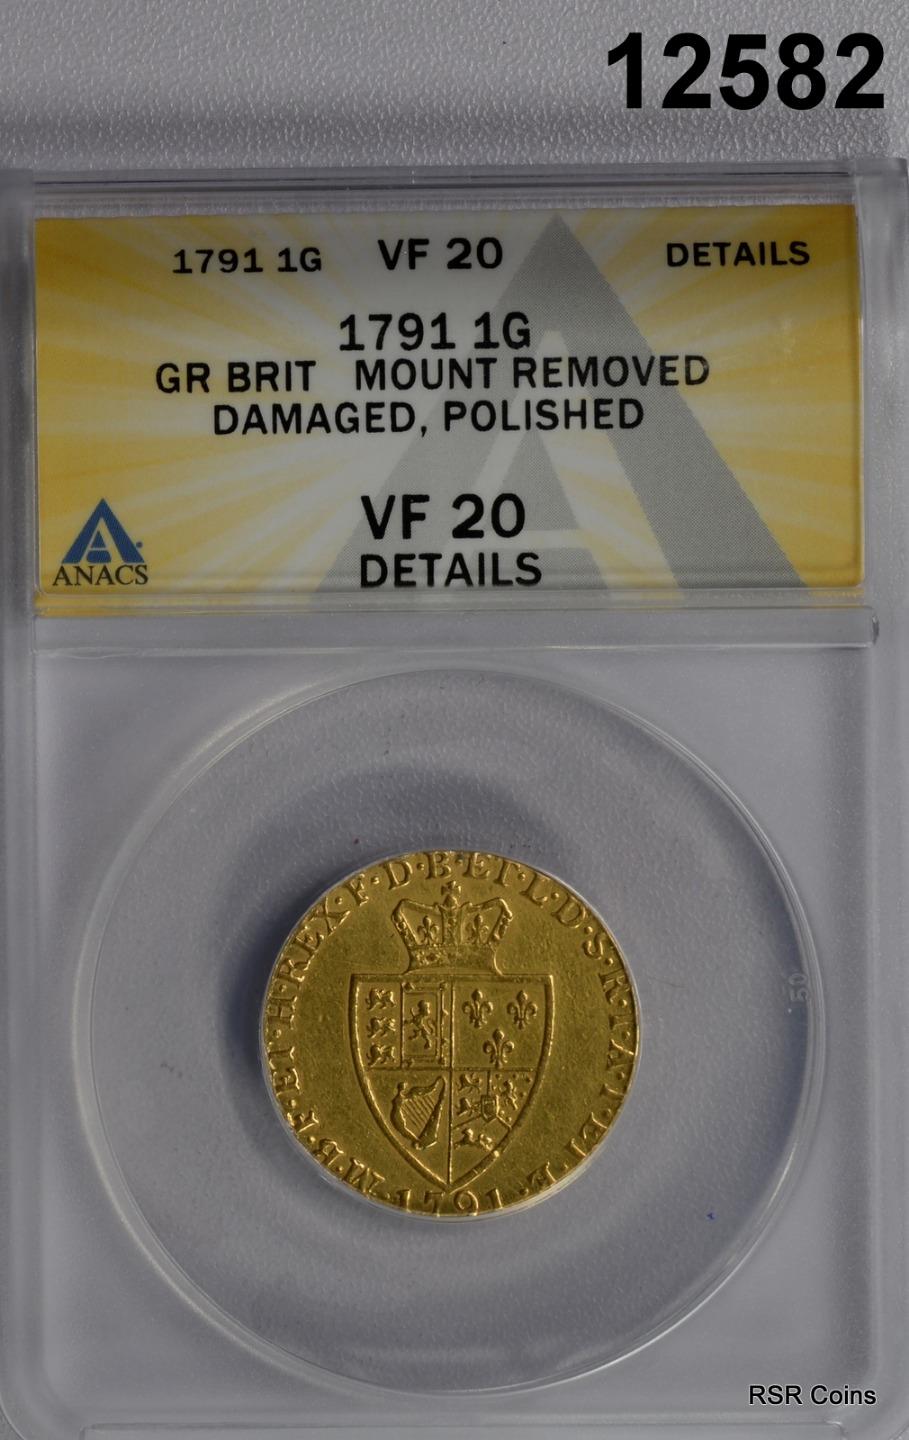 1791 GREAT BRITAIN 1 GUINEA 22 Ct GOLD COIN ANACS CERTIFIED VF20 DAMAGED#12582